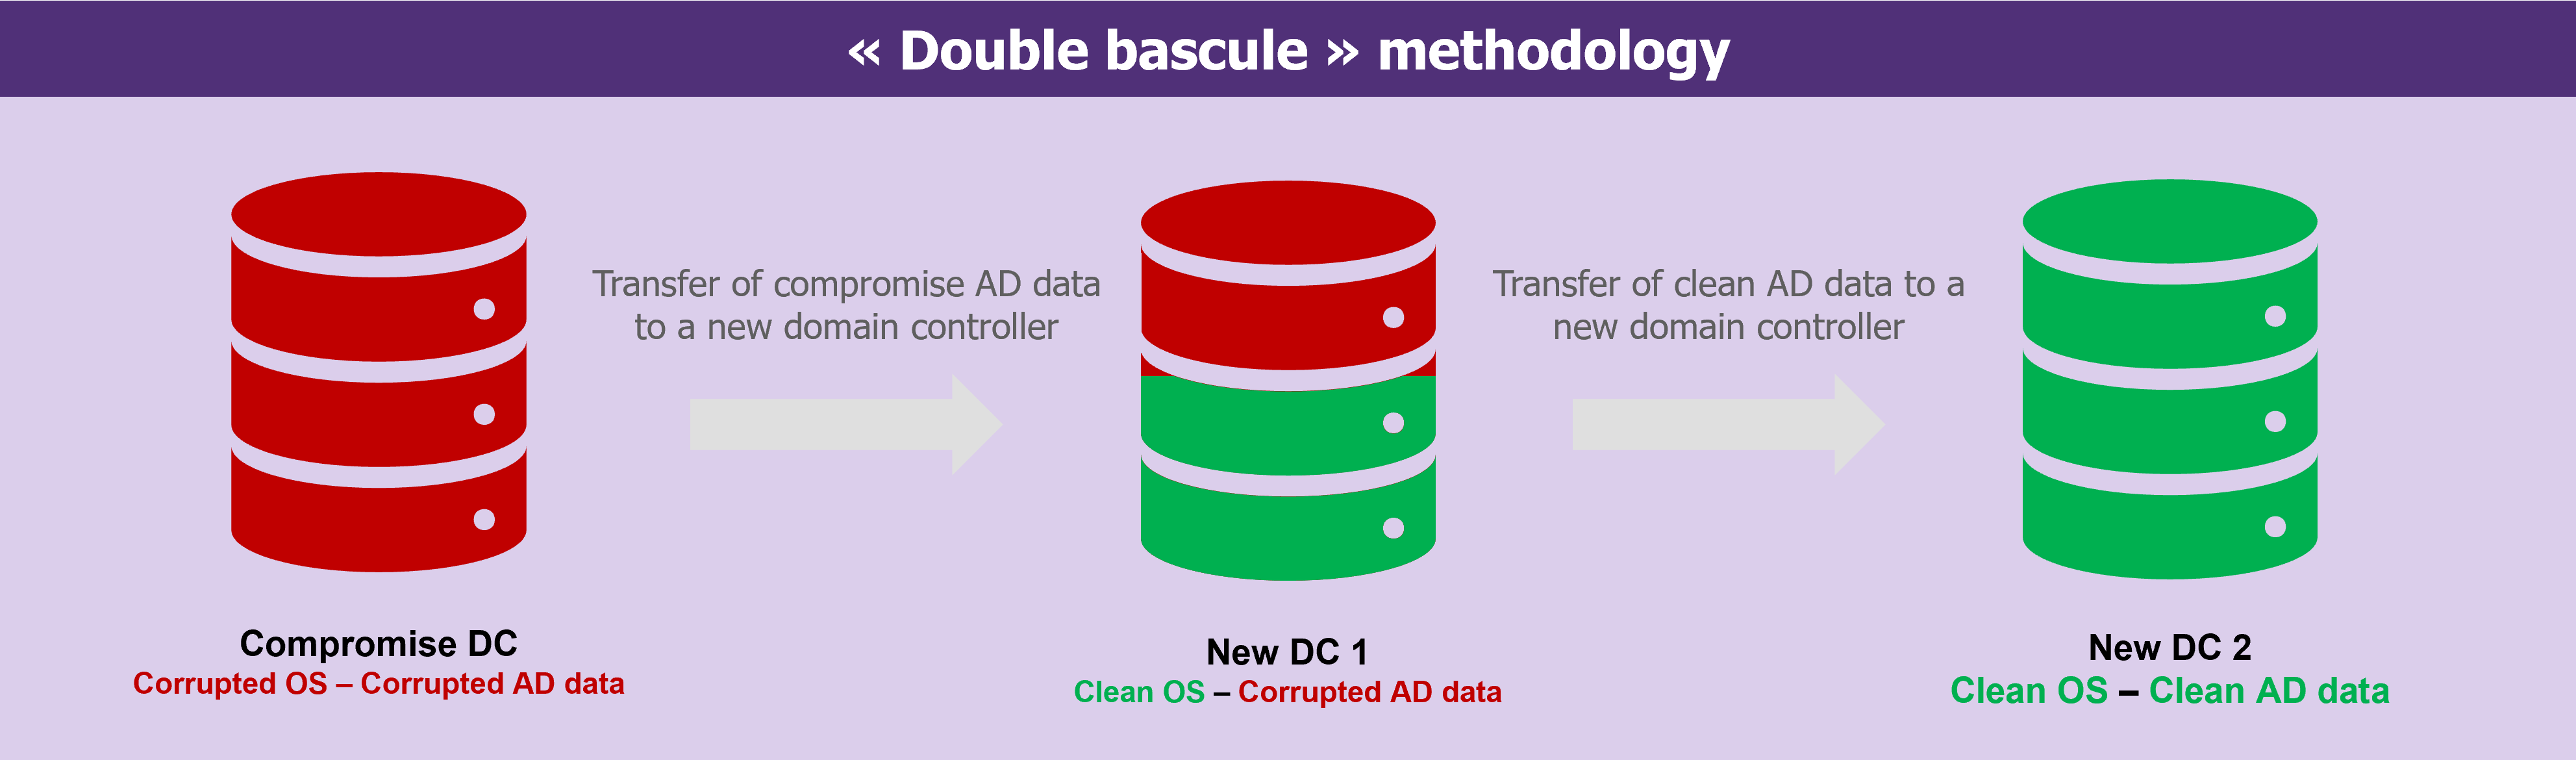 Overview - "double bascule" methodology